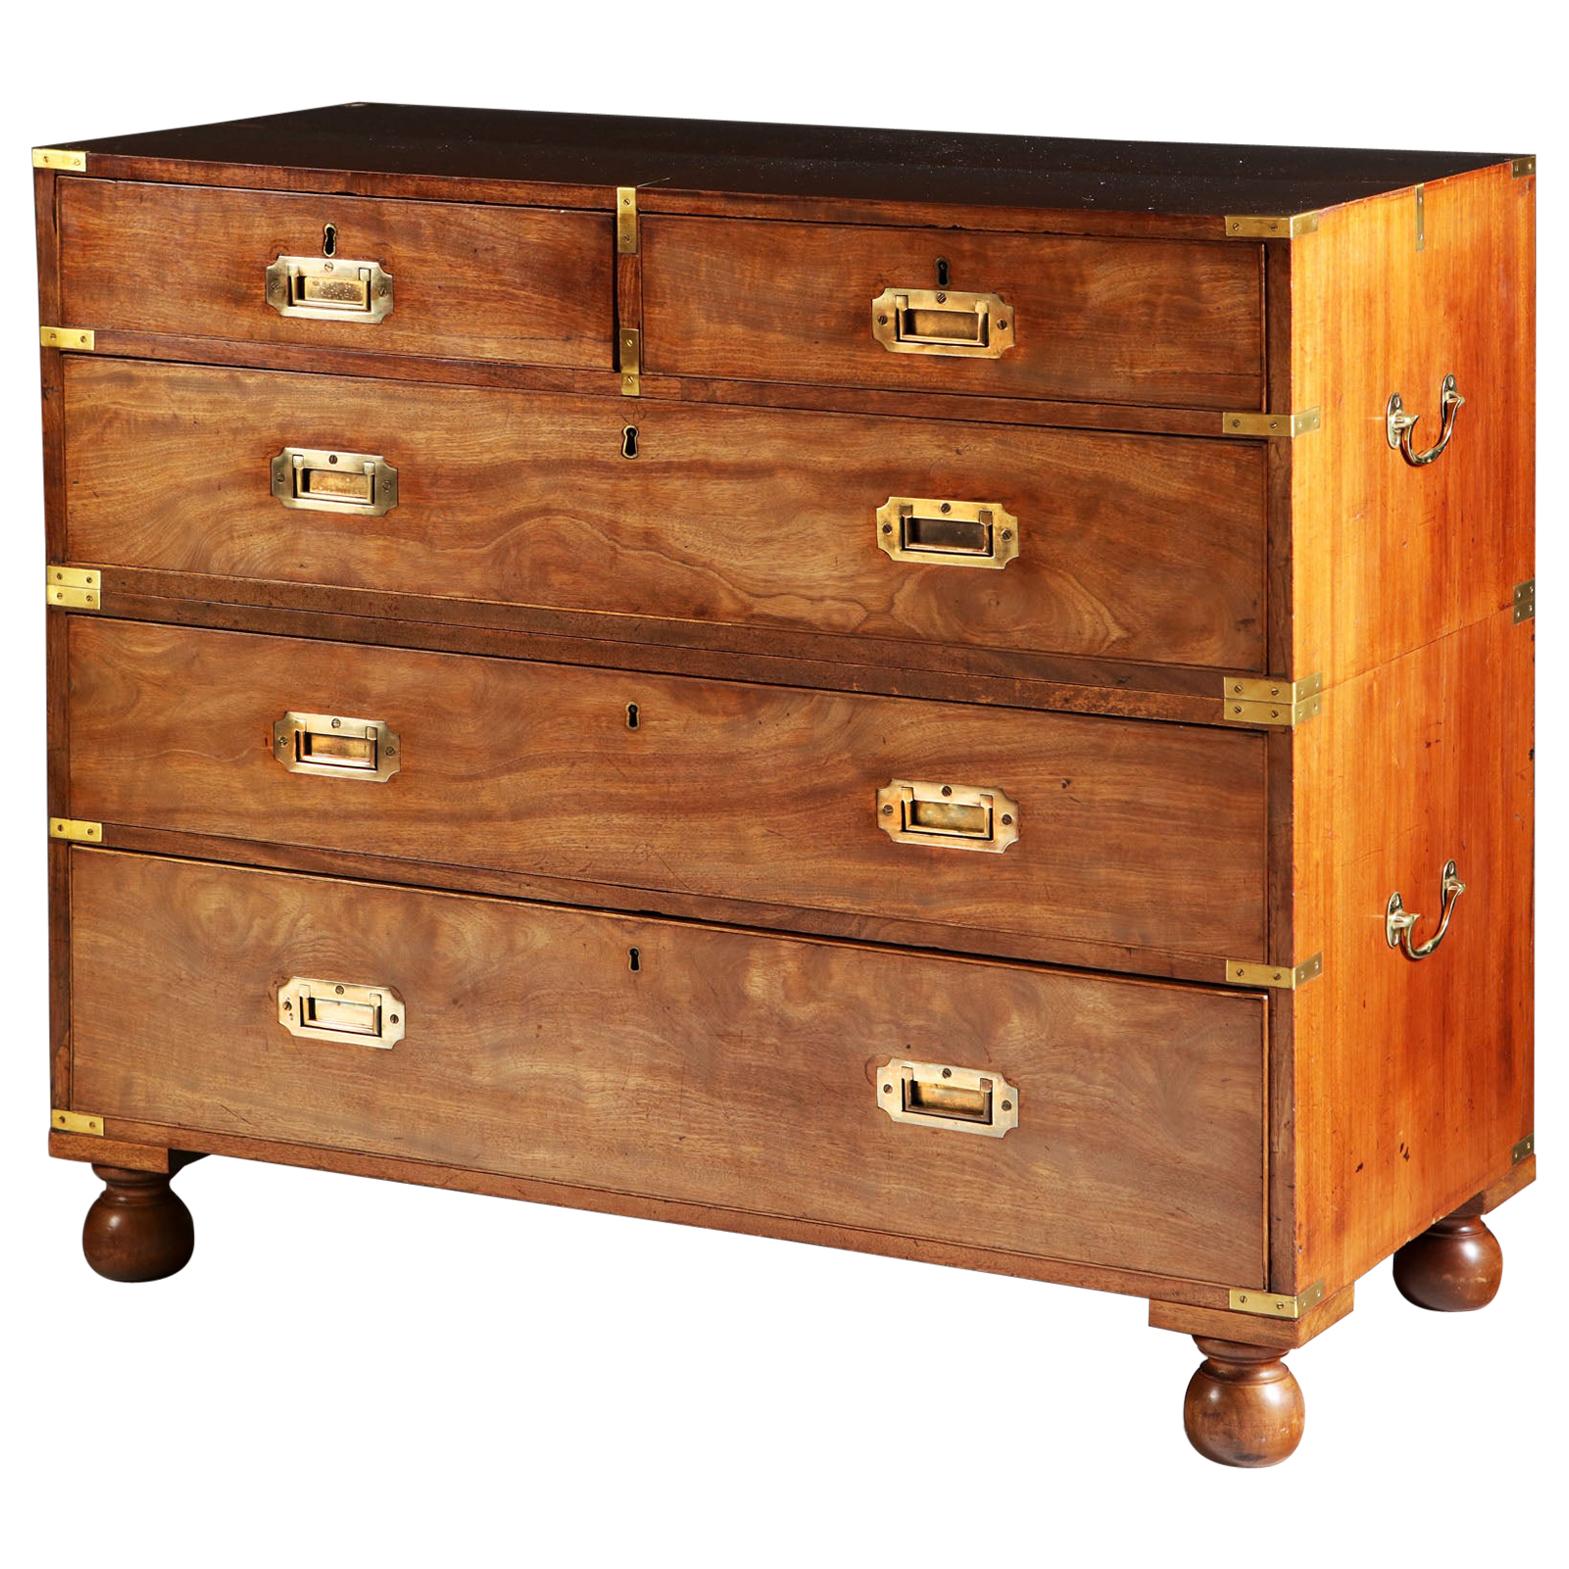 Late 19th Century English Mahogany Wood Campaign Chest of Drawers